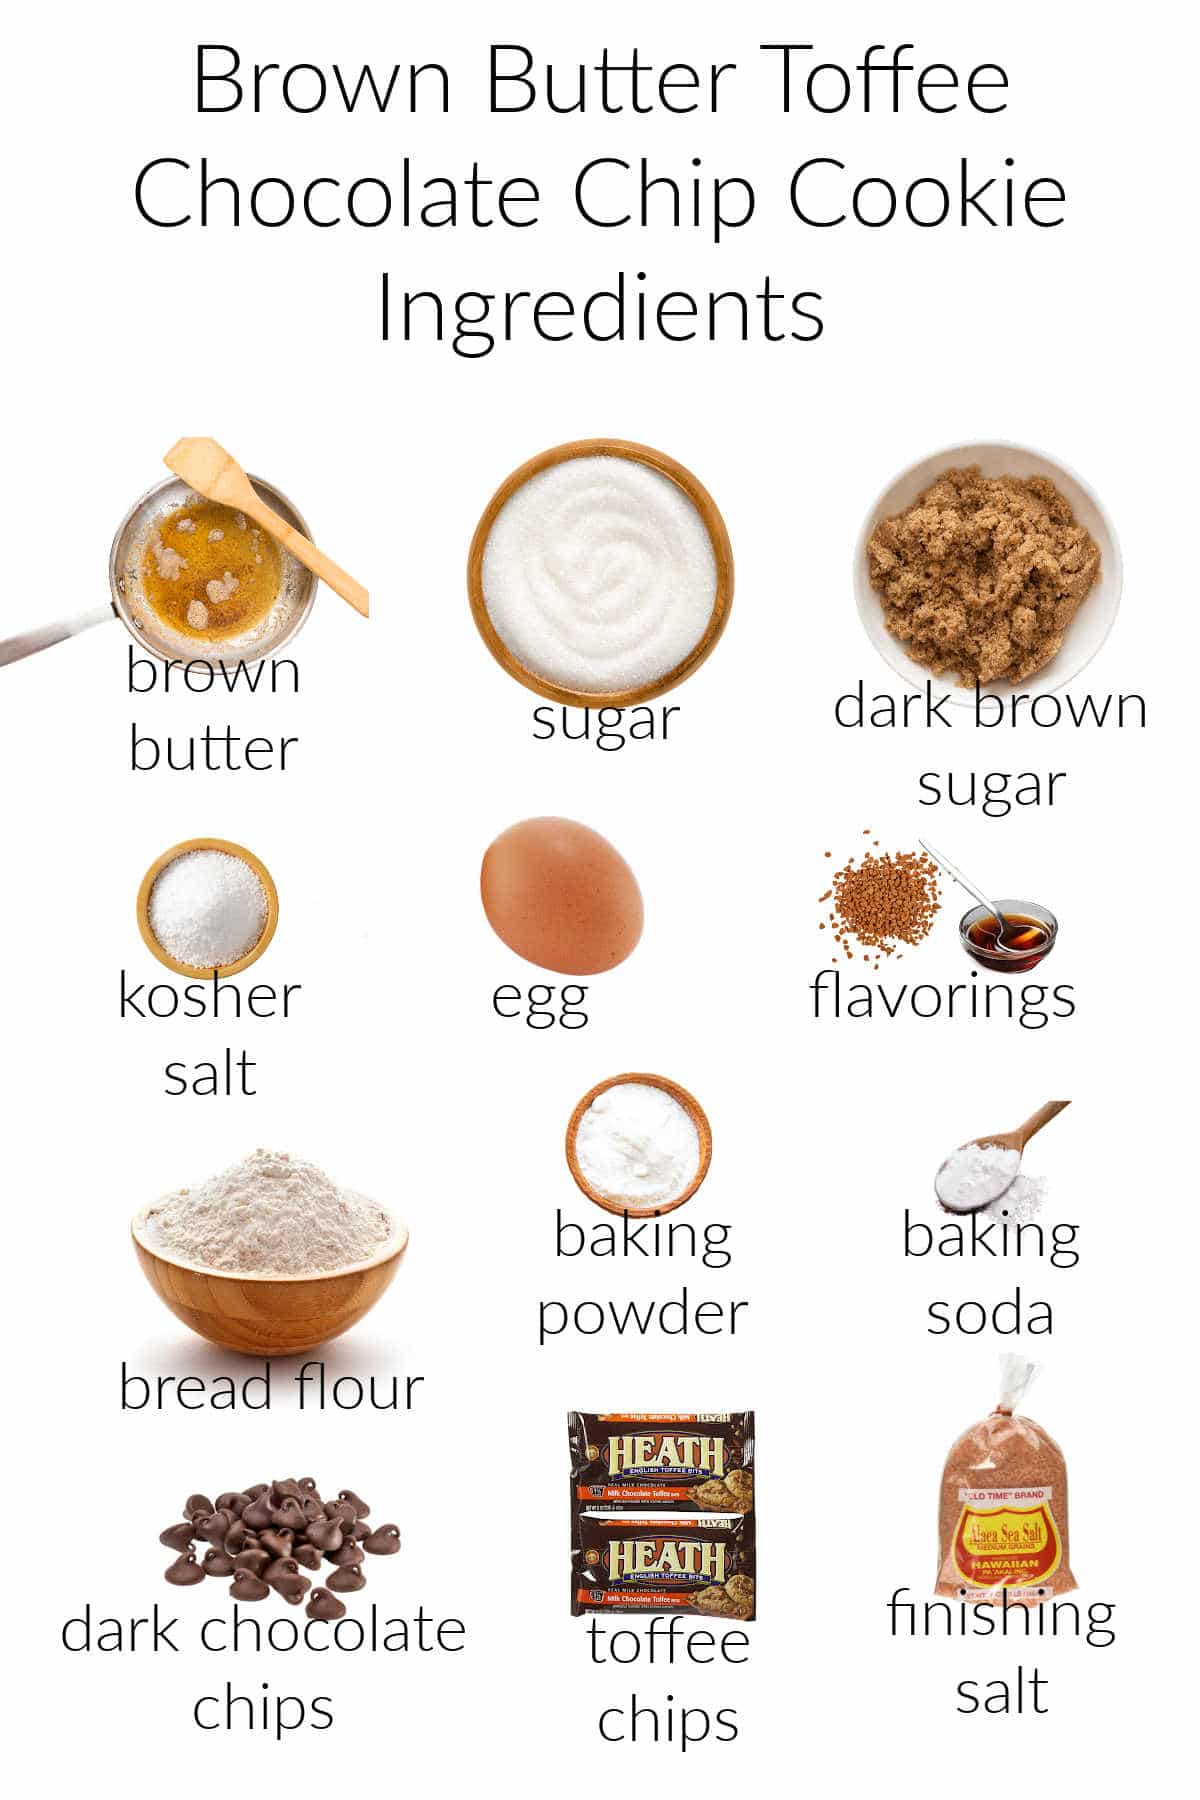 Ingredients needed to make brown butter toffee chip cookies.